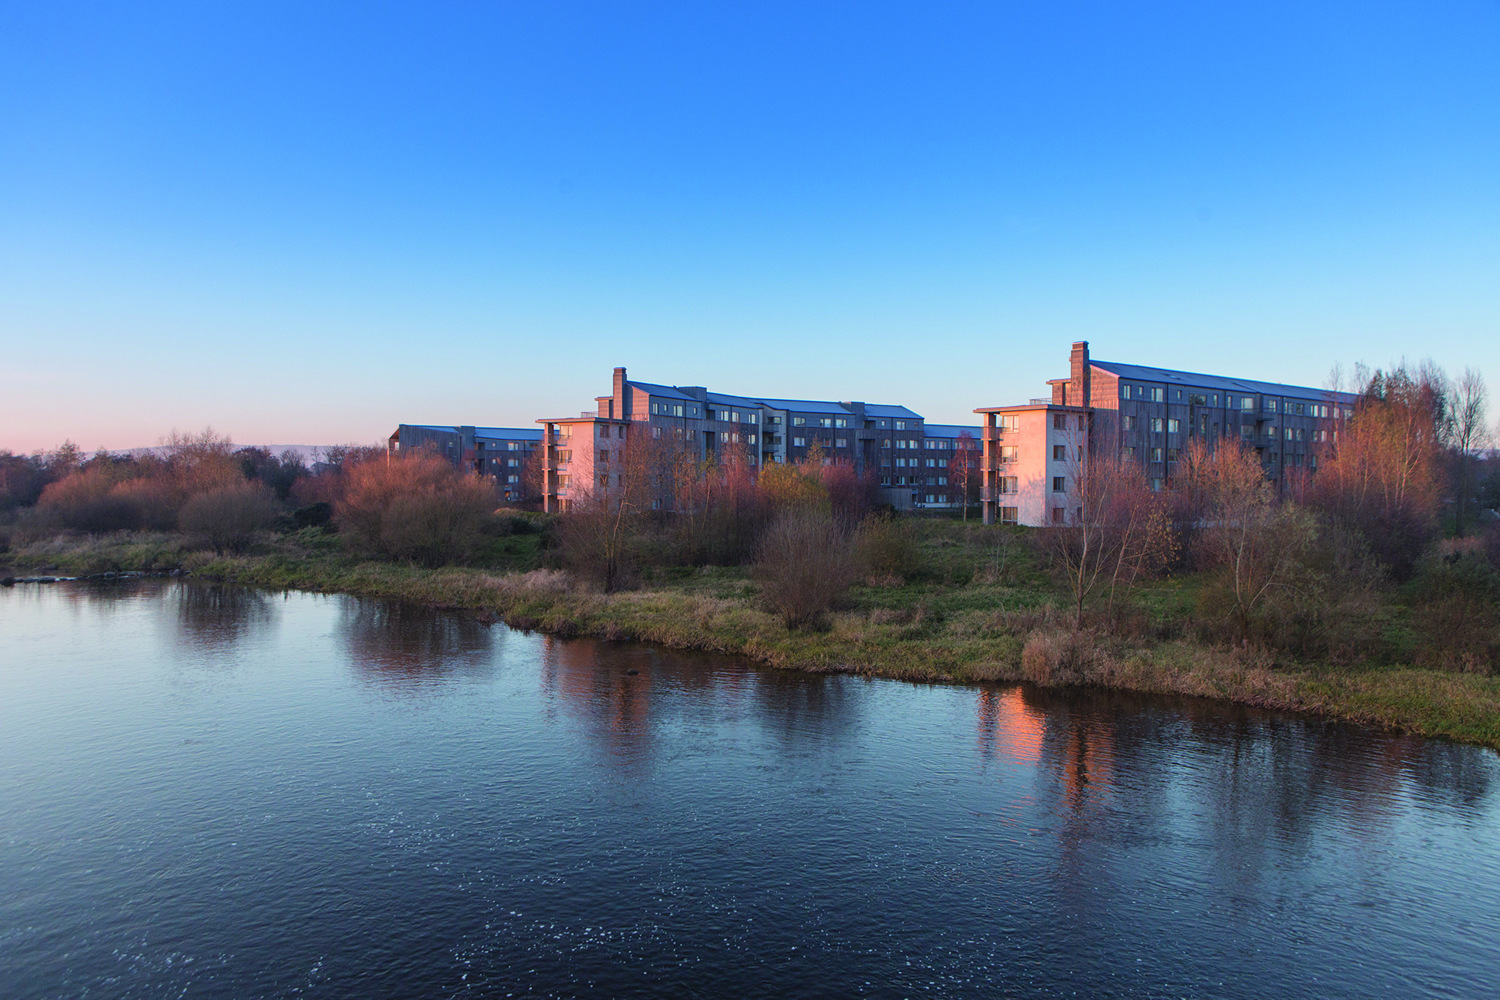 UL accommodation - A plea to Castletroy, Rhebogue and Limerick city residents circulated online asking locals to consider renting spare rooms to UL students.